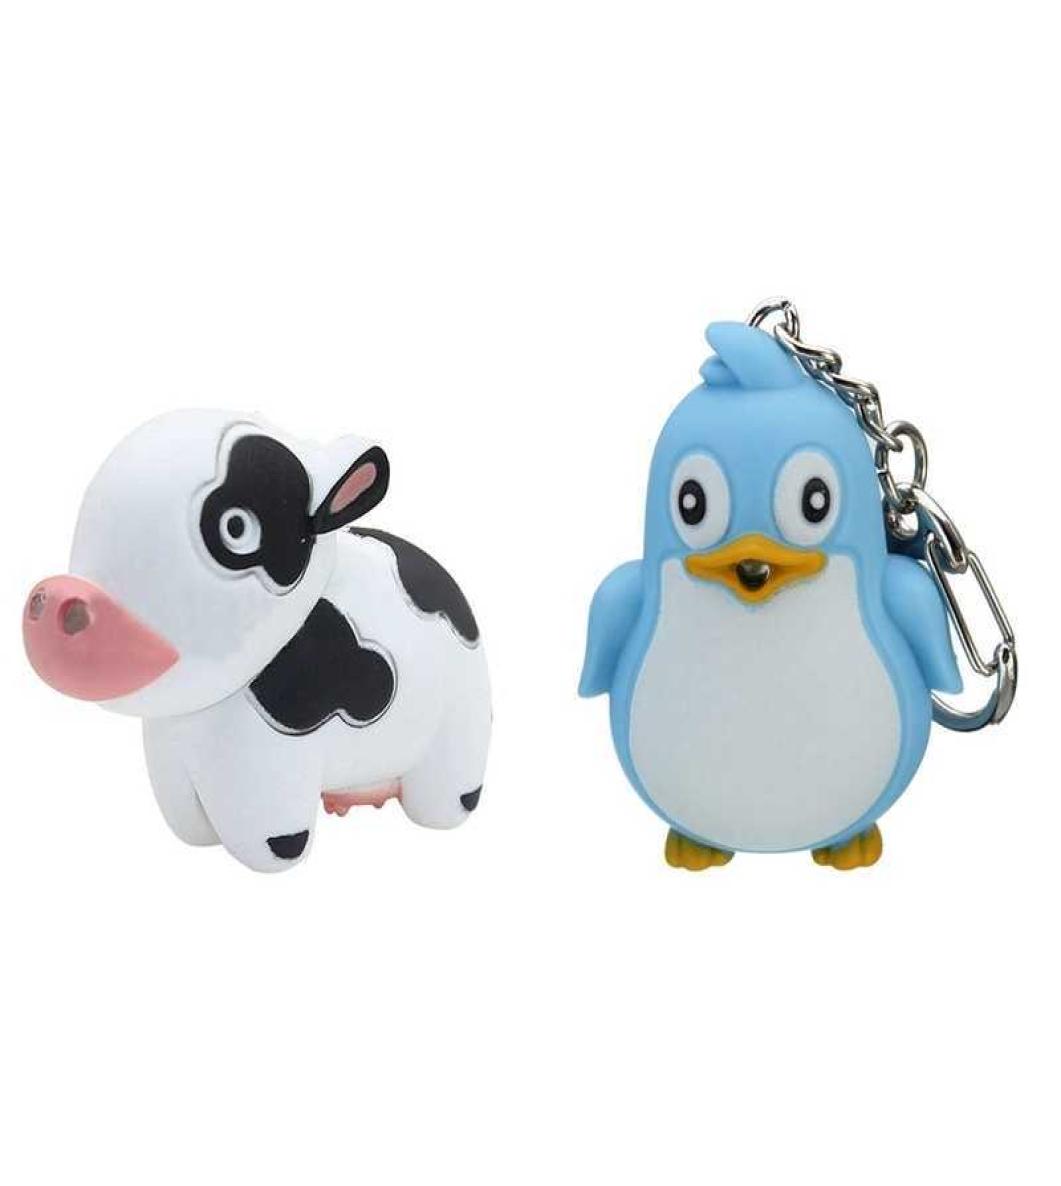 

Cute Cow Keyring Led Torch With Sound Keychain Christmas Xmas Party Favors Bag Fillers Gifts Fun Toys For Kids Adult Whit8847585